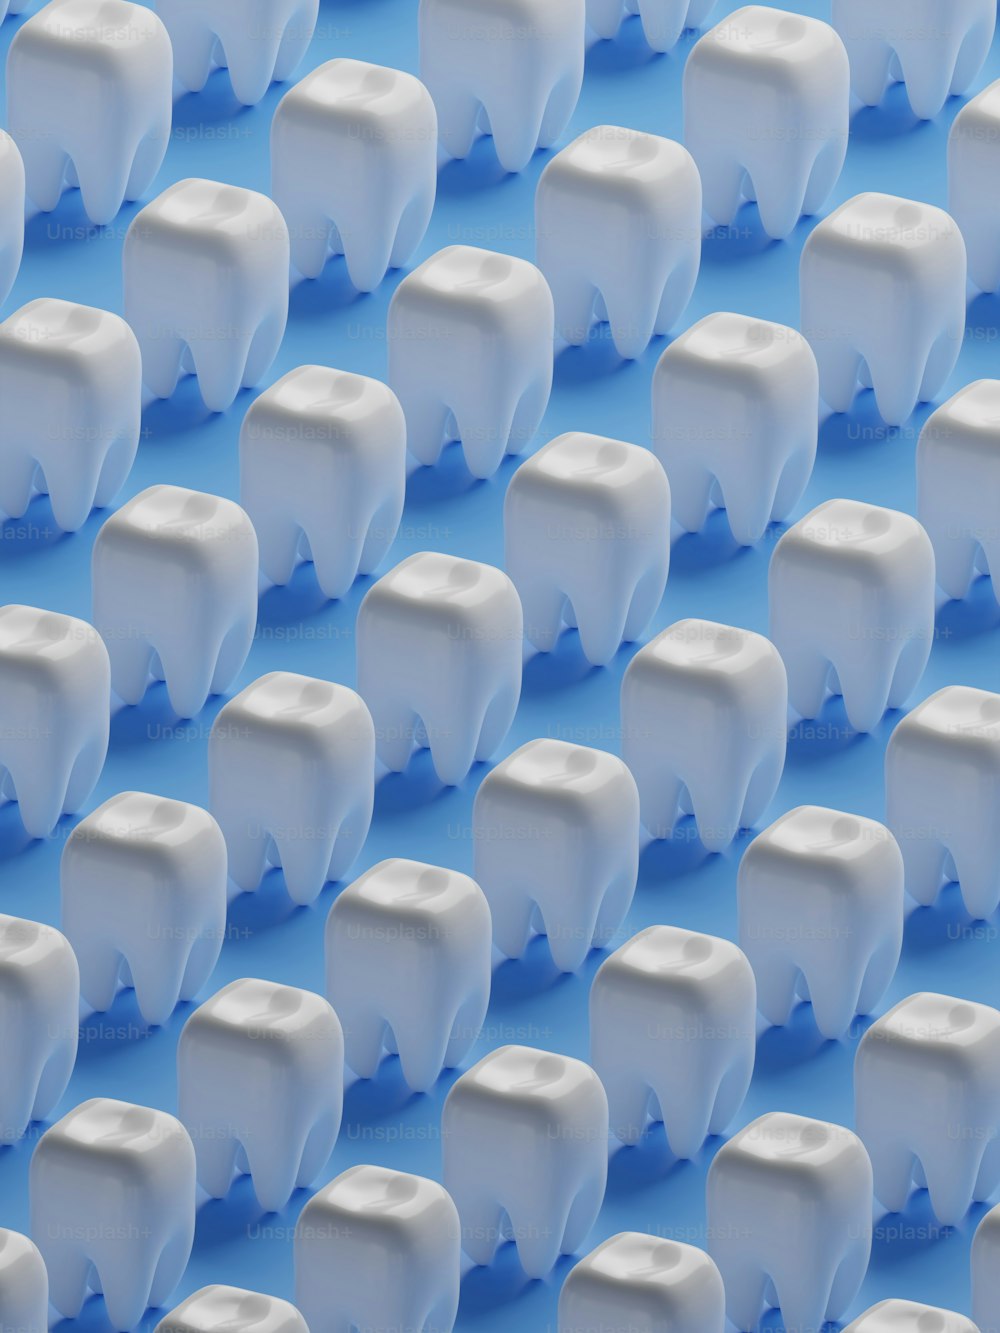 a large group of white elephants on a blue background